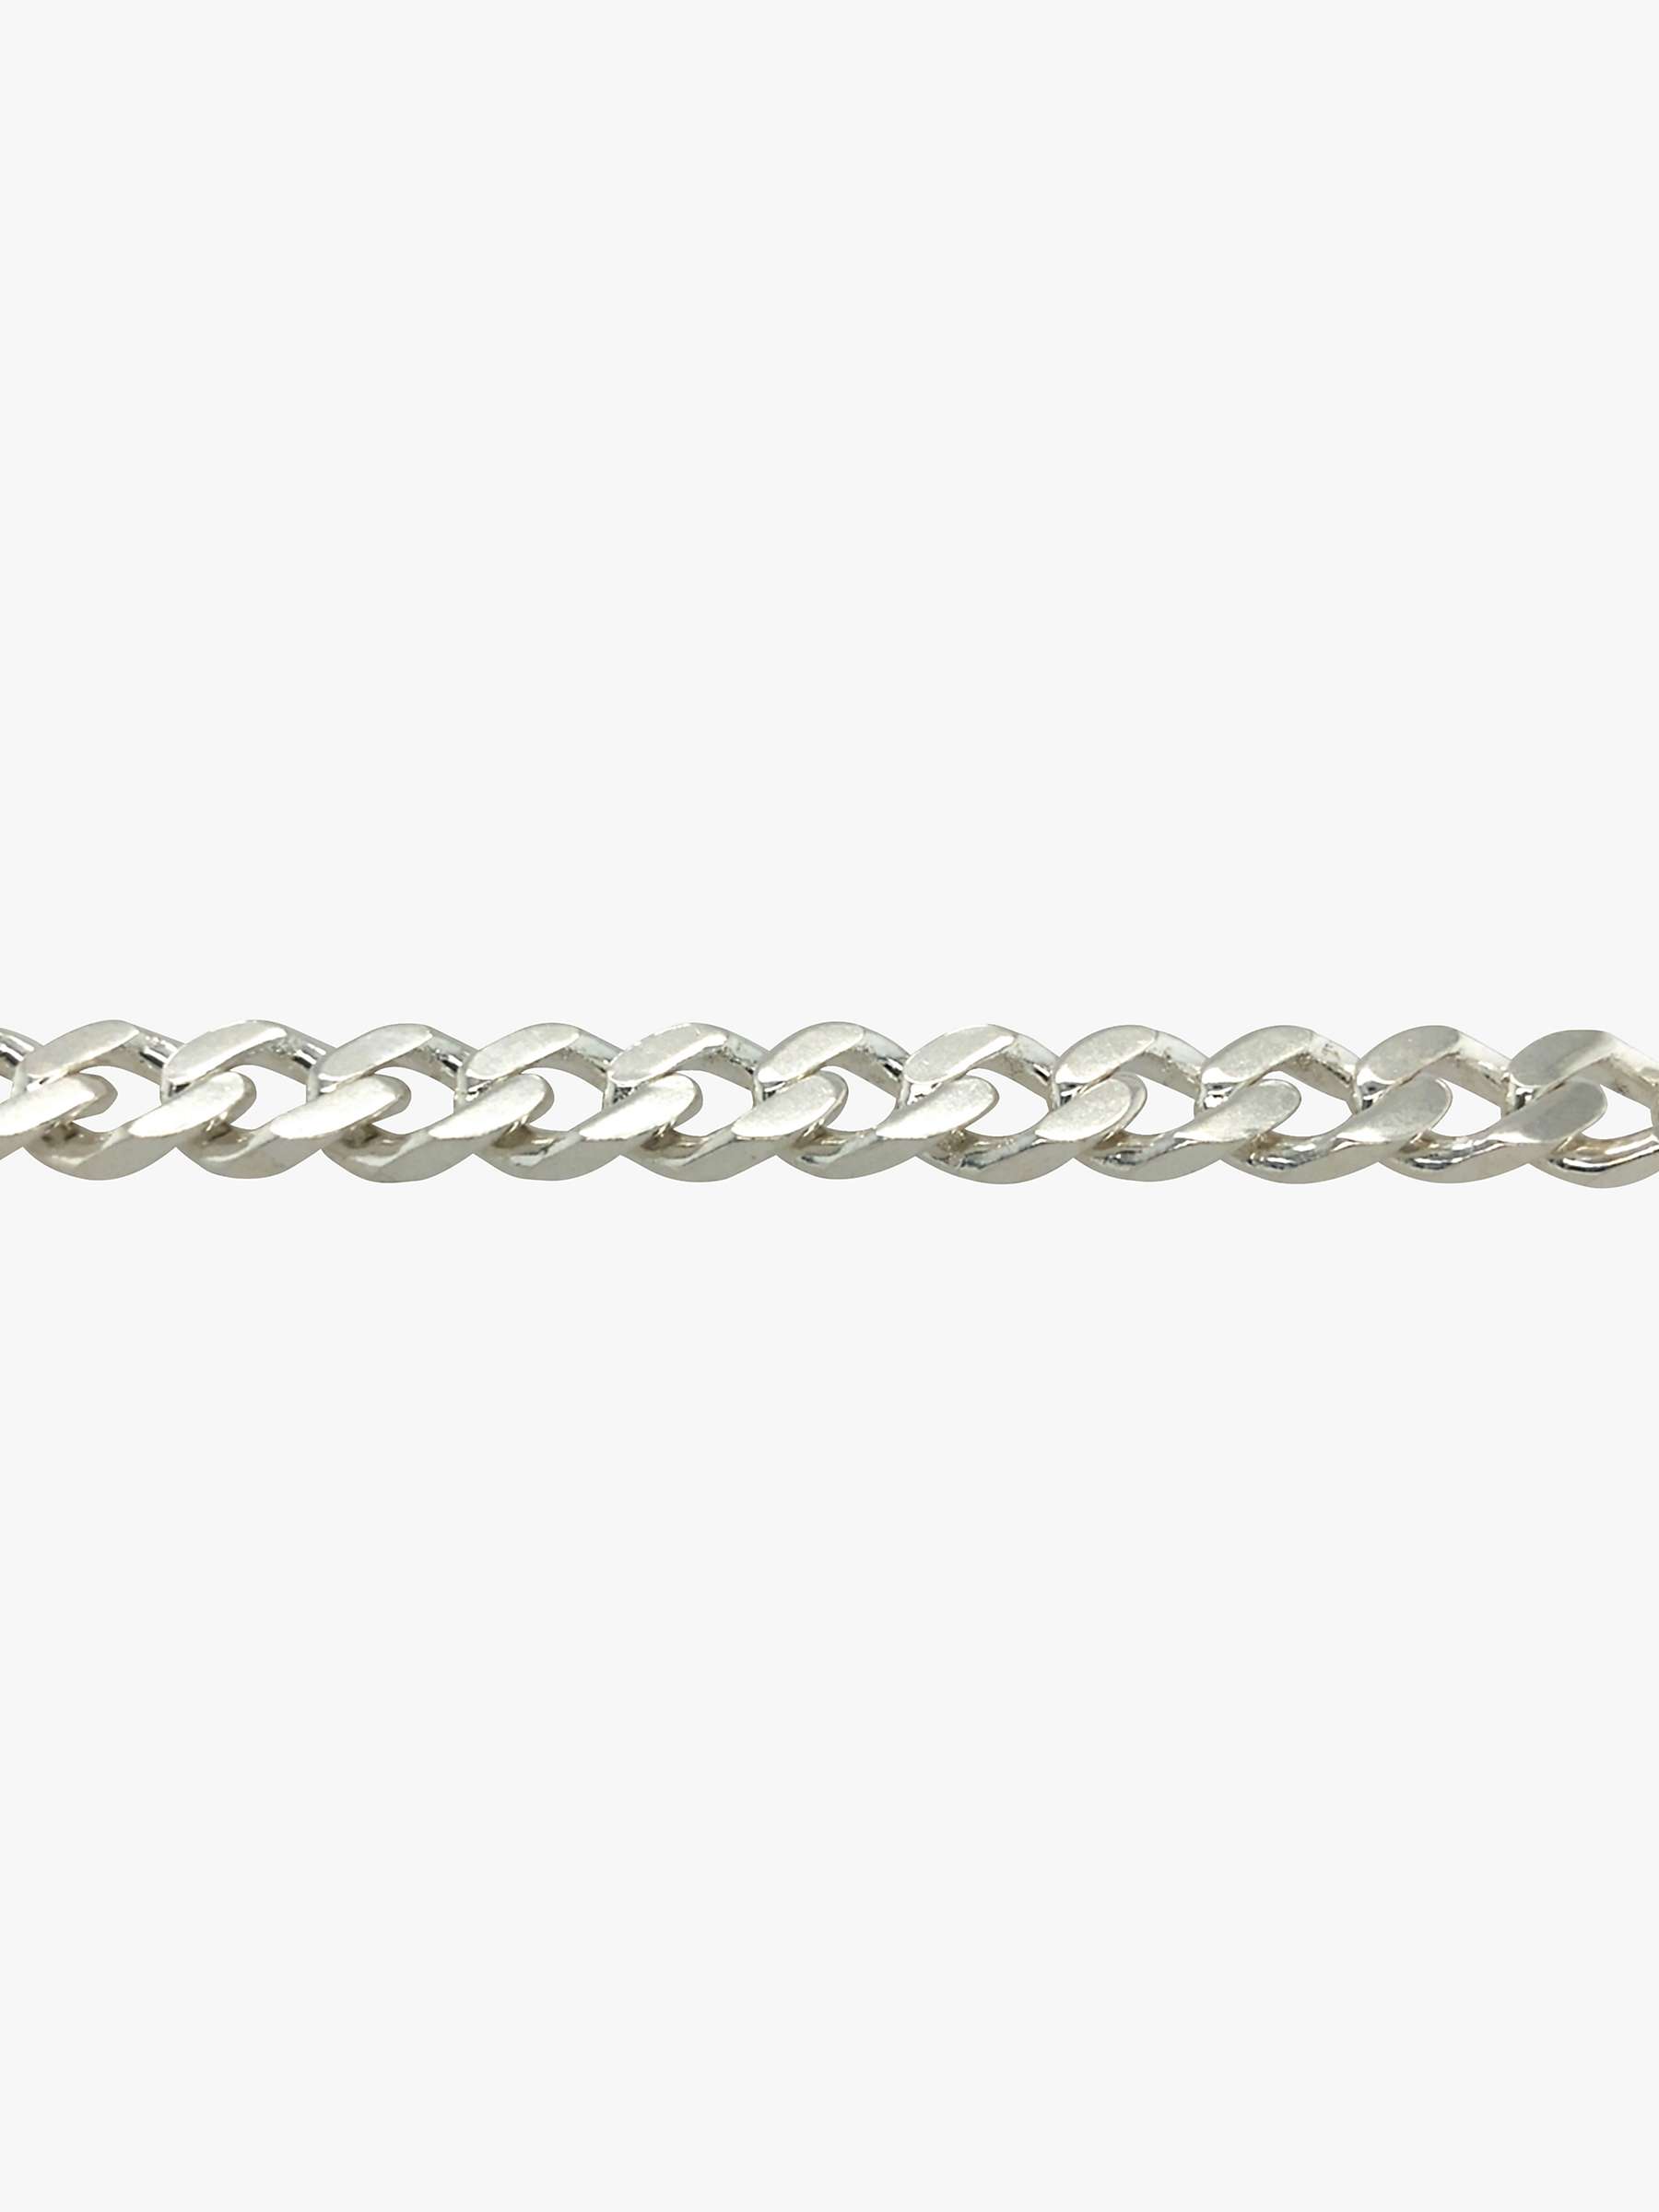 Buy Vintage Fine Jewellery Second Hand Flat Curb Link Chain Necklace, Dated Circa 1980s Online at johnlewis.com